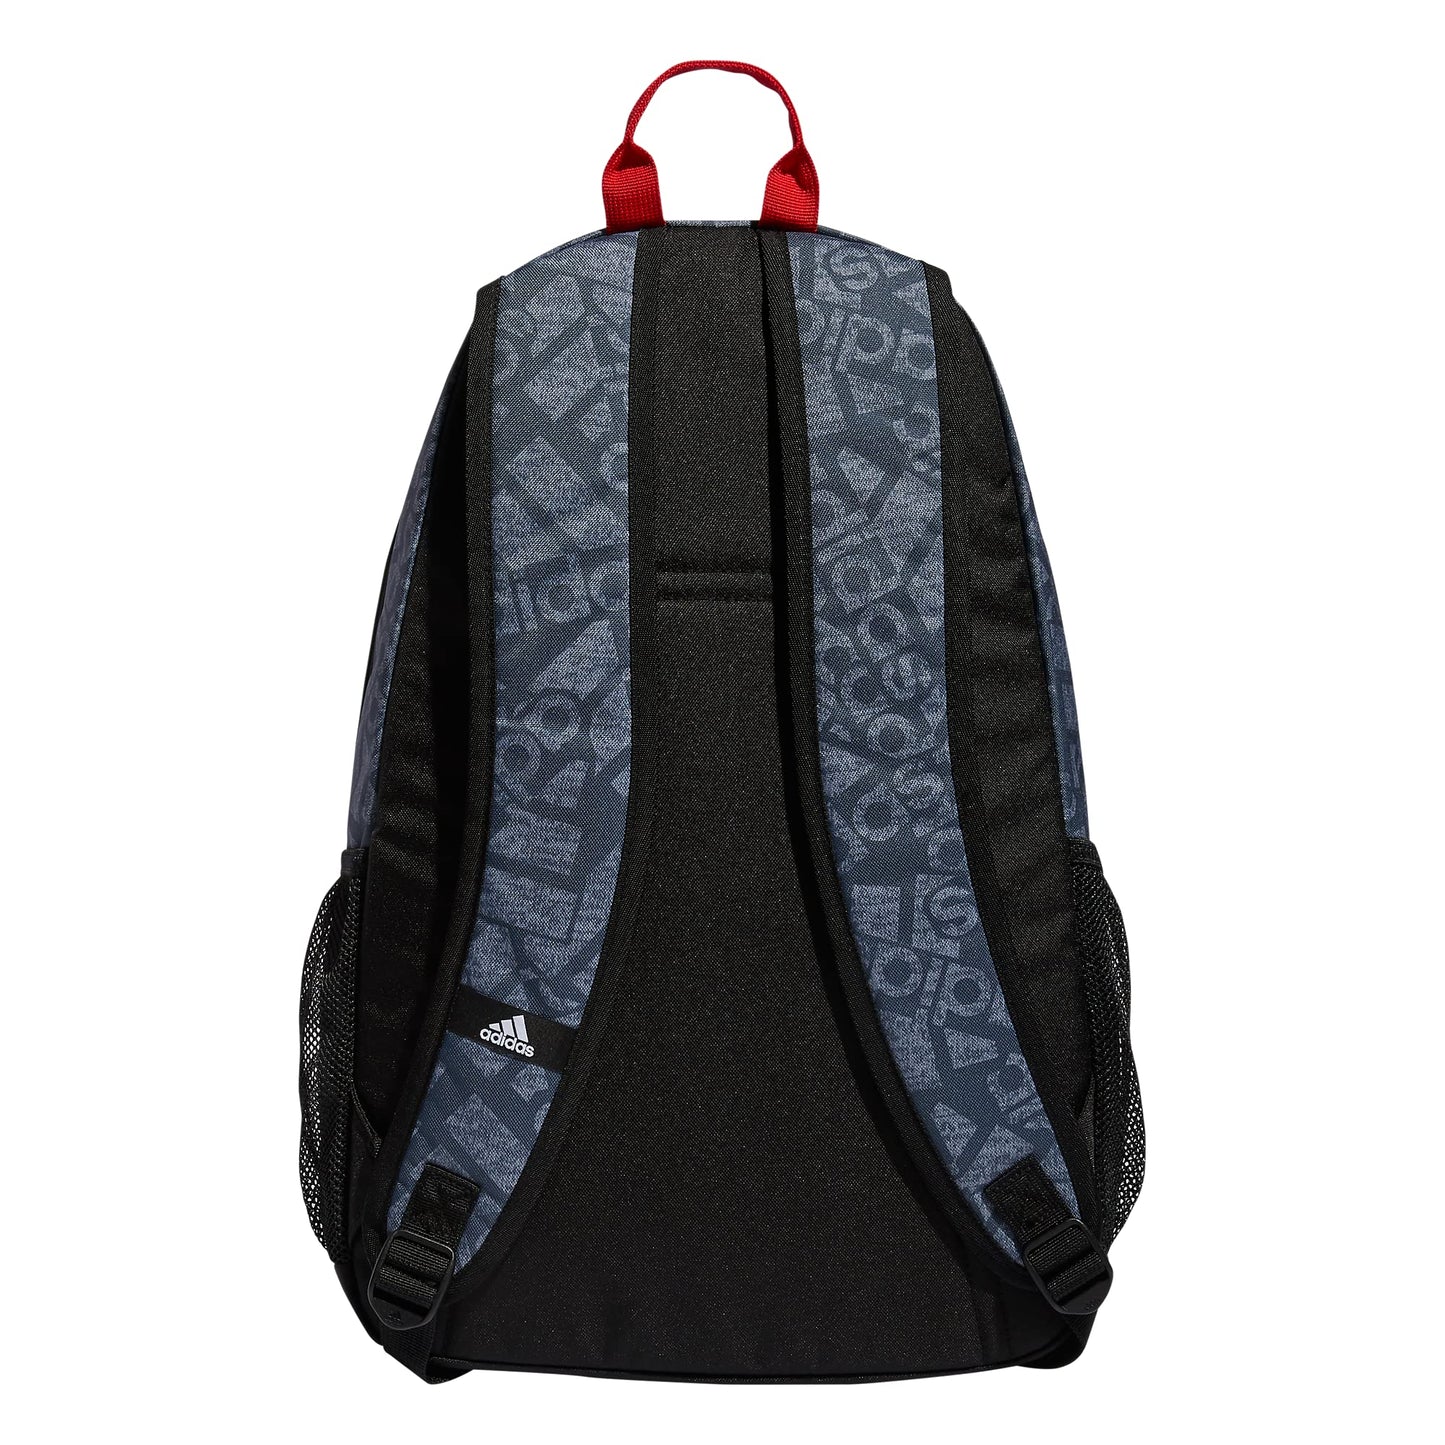 adidas Foundation 6 Backpack, ADI Collage Jersey Onix-Grey/Black/Vivid Red, One Size